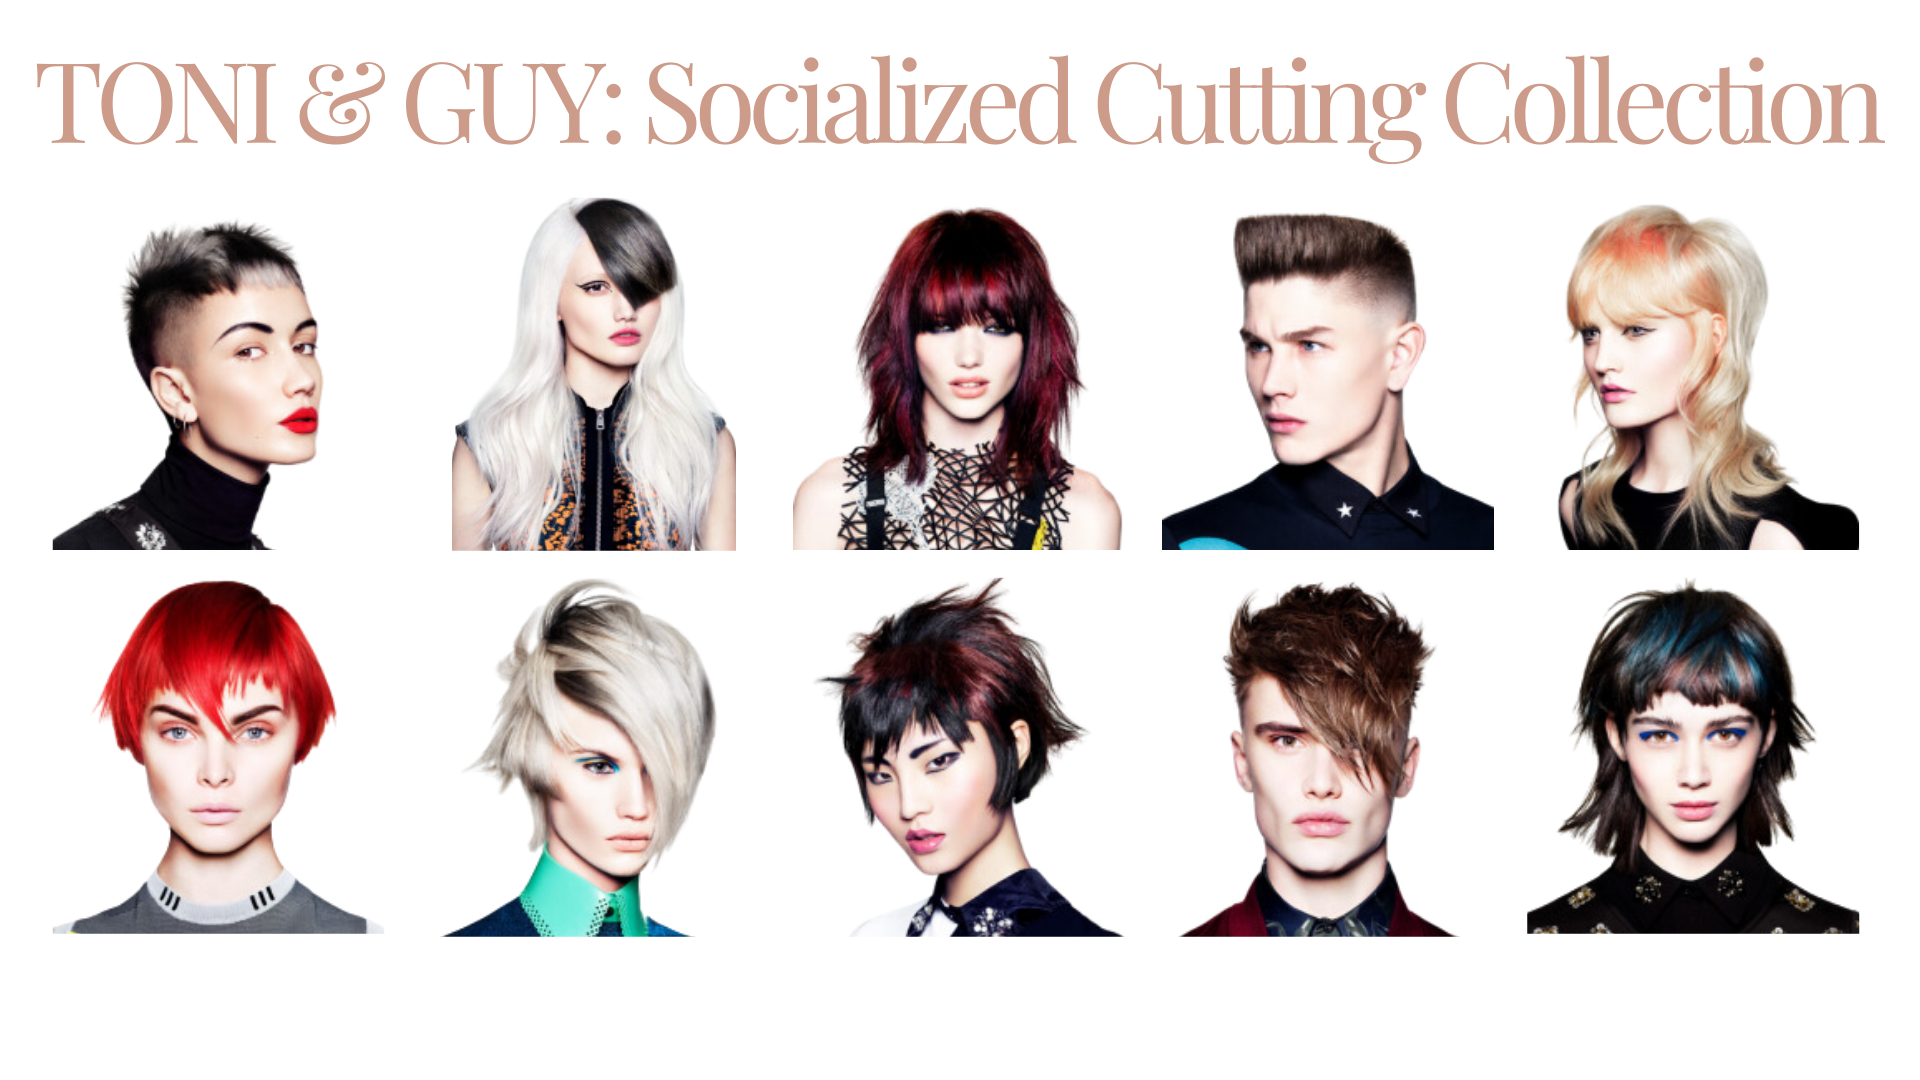 TONI&GUY: Socialized Cutting Collection